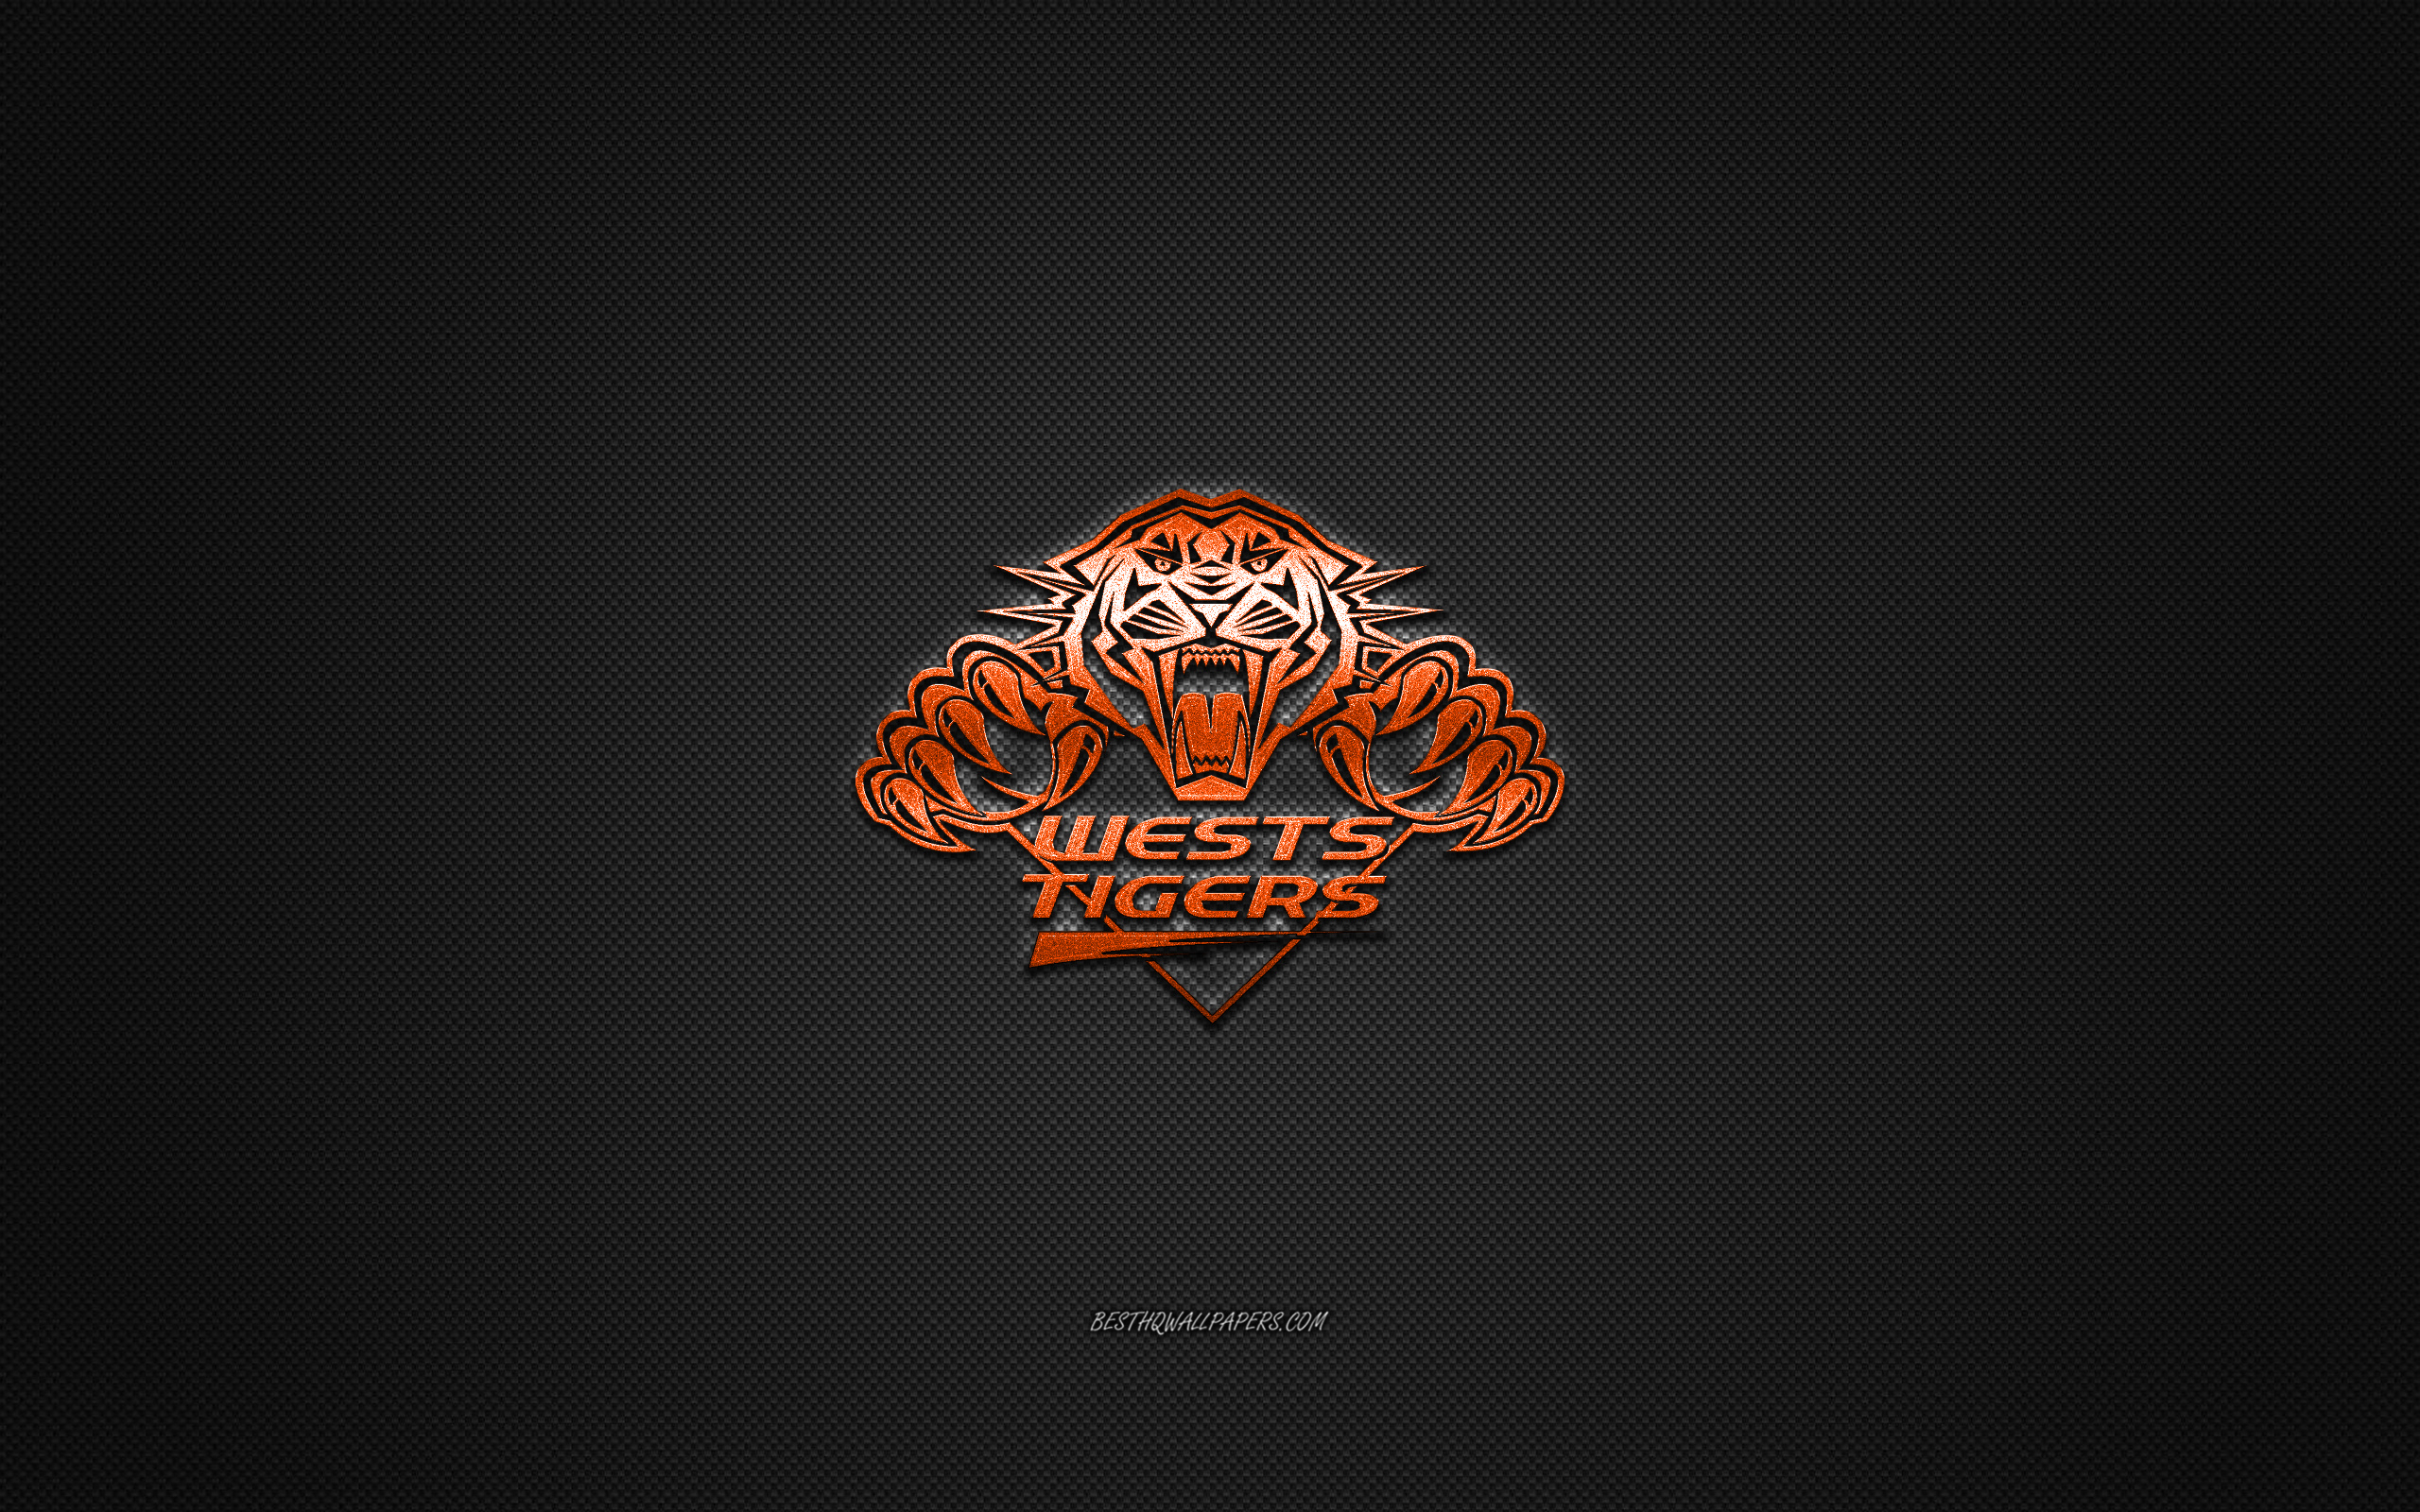 Download wallpaper Wests Tigers, Australian rugby club, NRL, orange logo, green carbon fiber background, National Rugby League, rugby, Sydney, Australia, Wests Tigers logo for desktop with resolution 2560x1600. High Quality HD picture